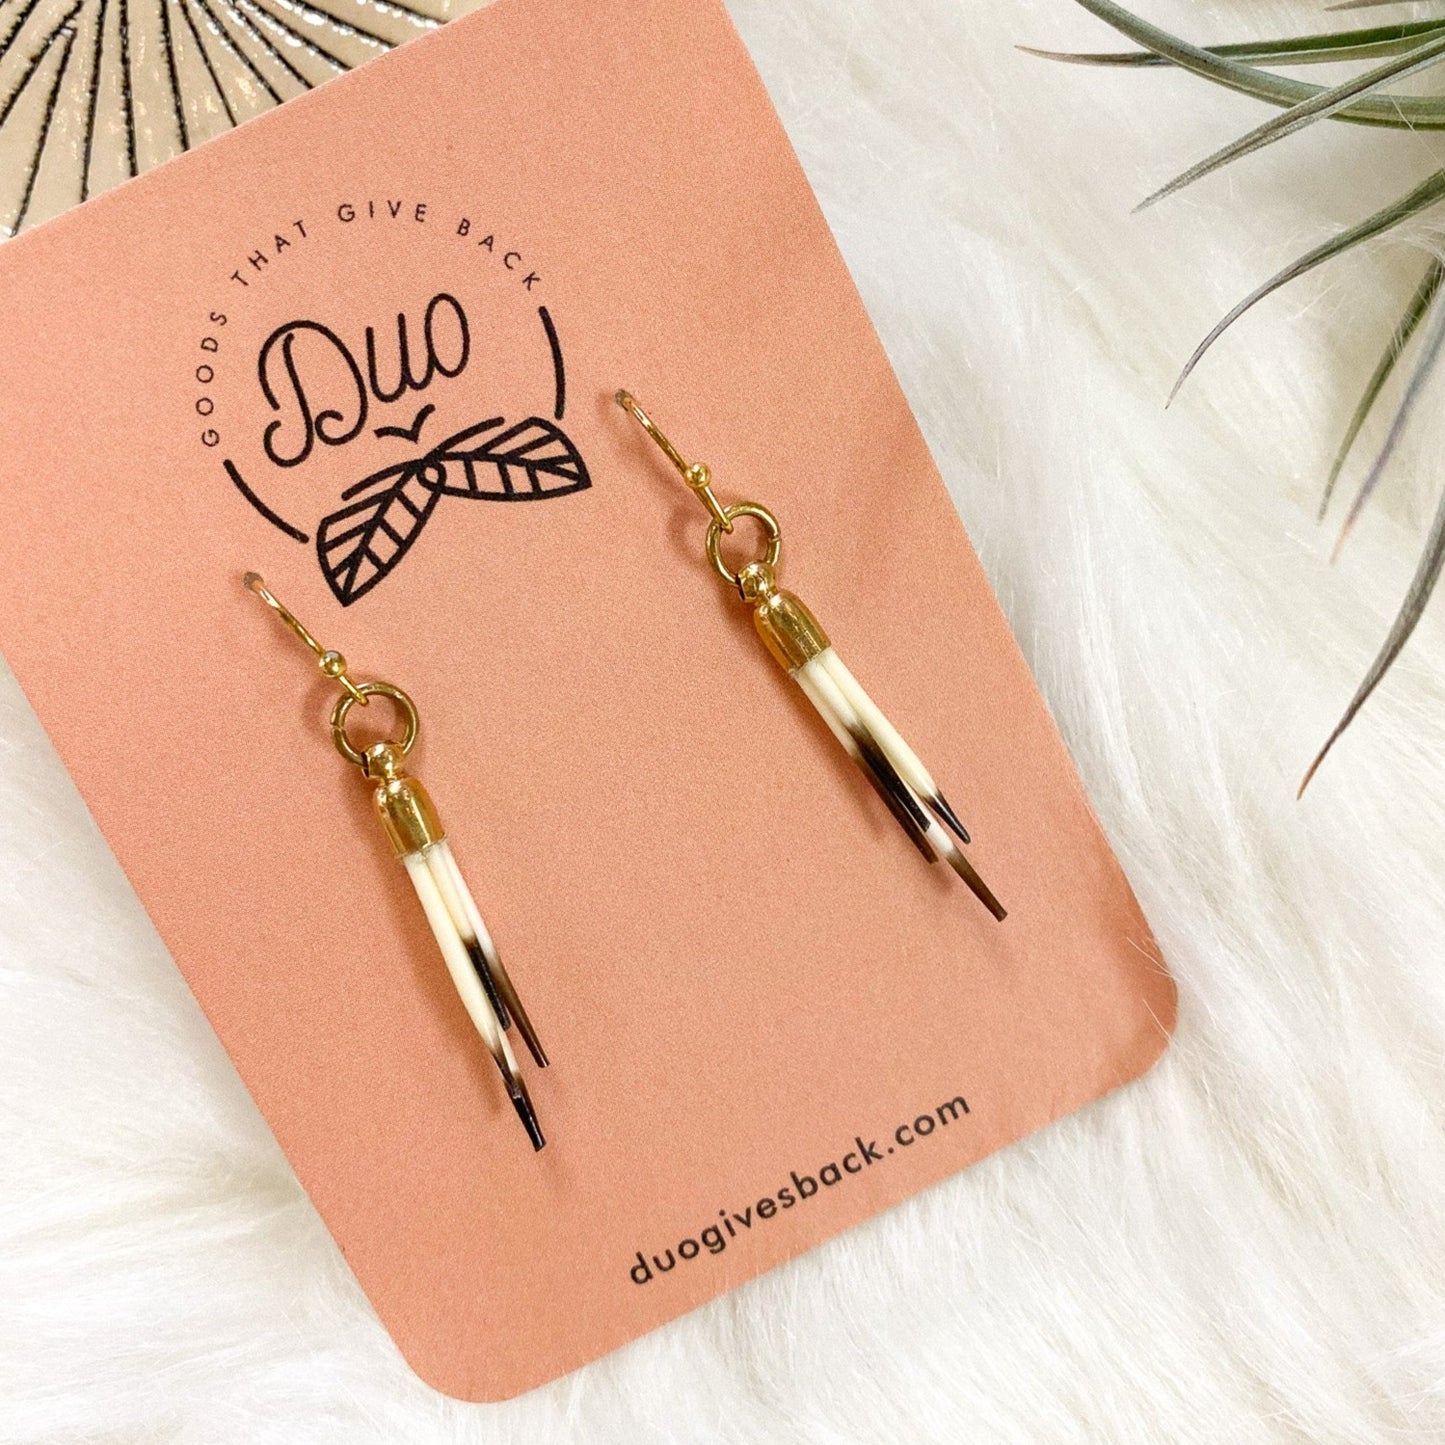 Quill Fringe Brass Earrings by DUO Goods